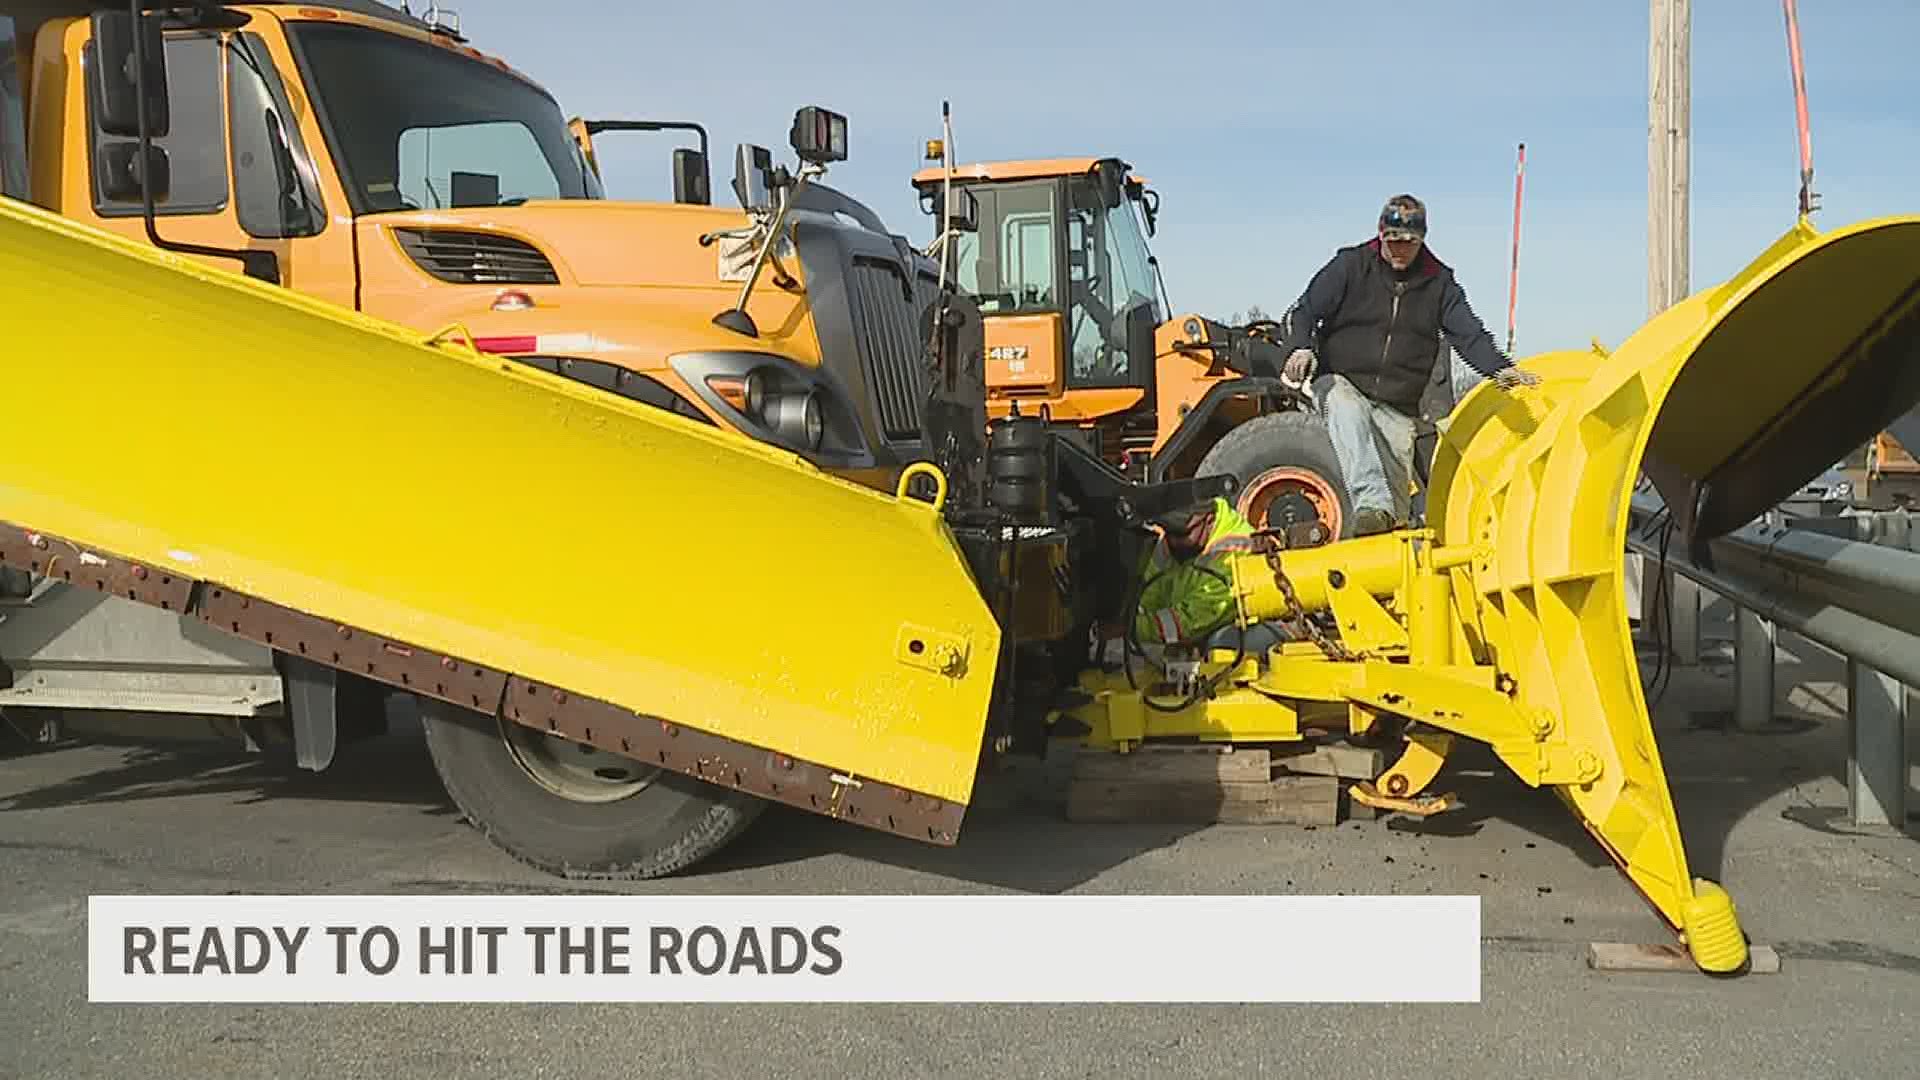 PennDOT plans to focus on the interstates and pretreats secondary roads to stay ahead of the snowfall